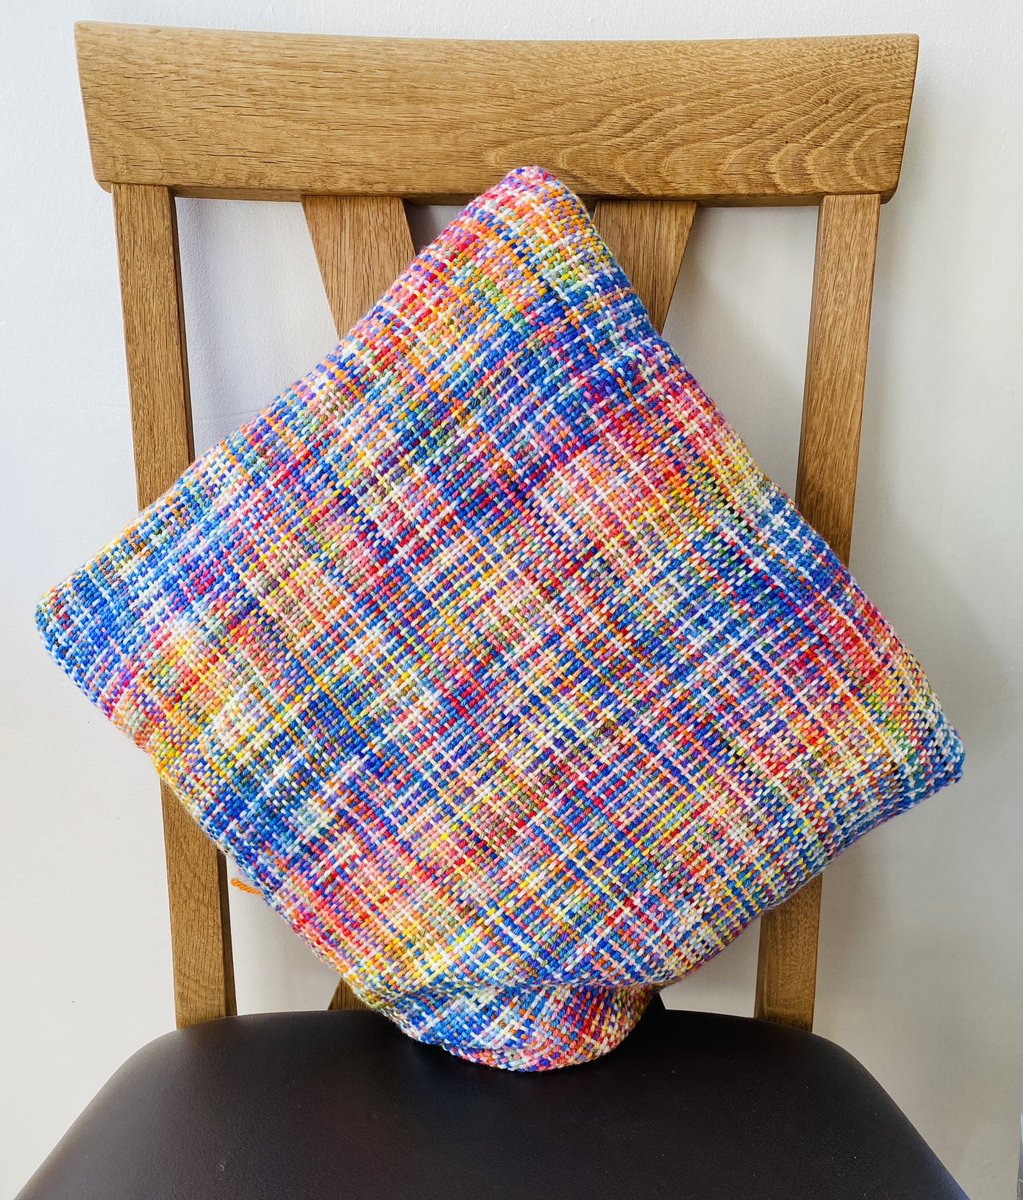 Envelope-style cushion covers, handwoven in colours and design for no extra using Falklands Merino or Alpaca from Uk Alpaca Ltd Buy with or without a handmade British wool insert by woolsoft.co.uk justwooltextiles.co.uk #cushioncovers #handmade #britishwool